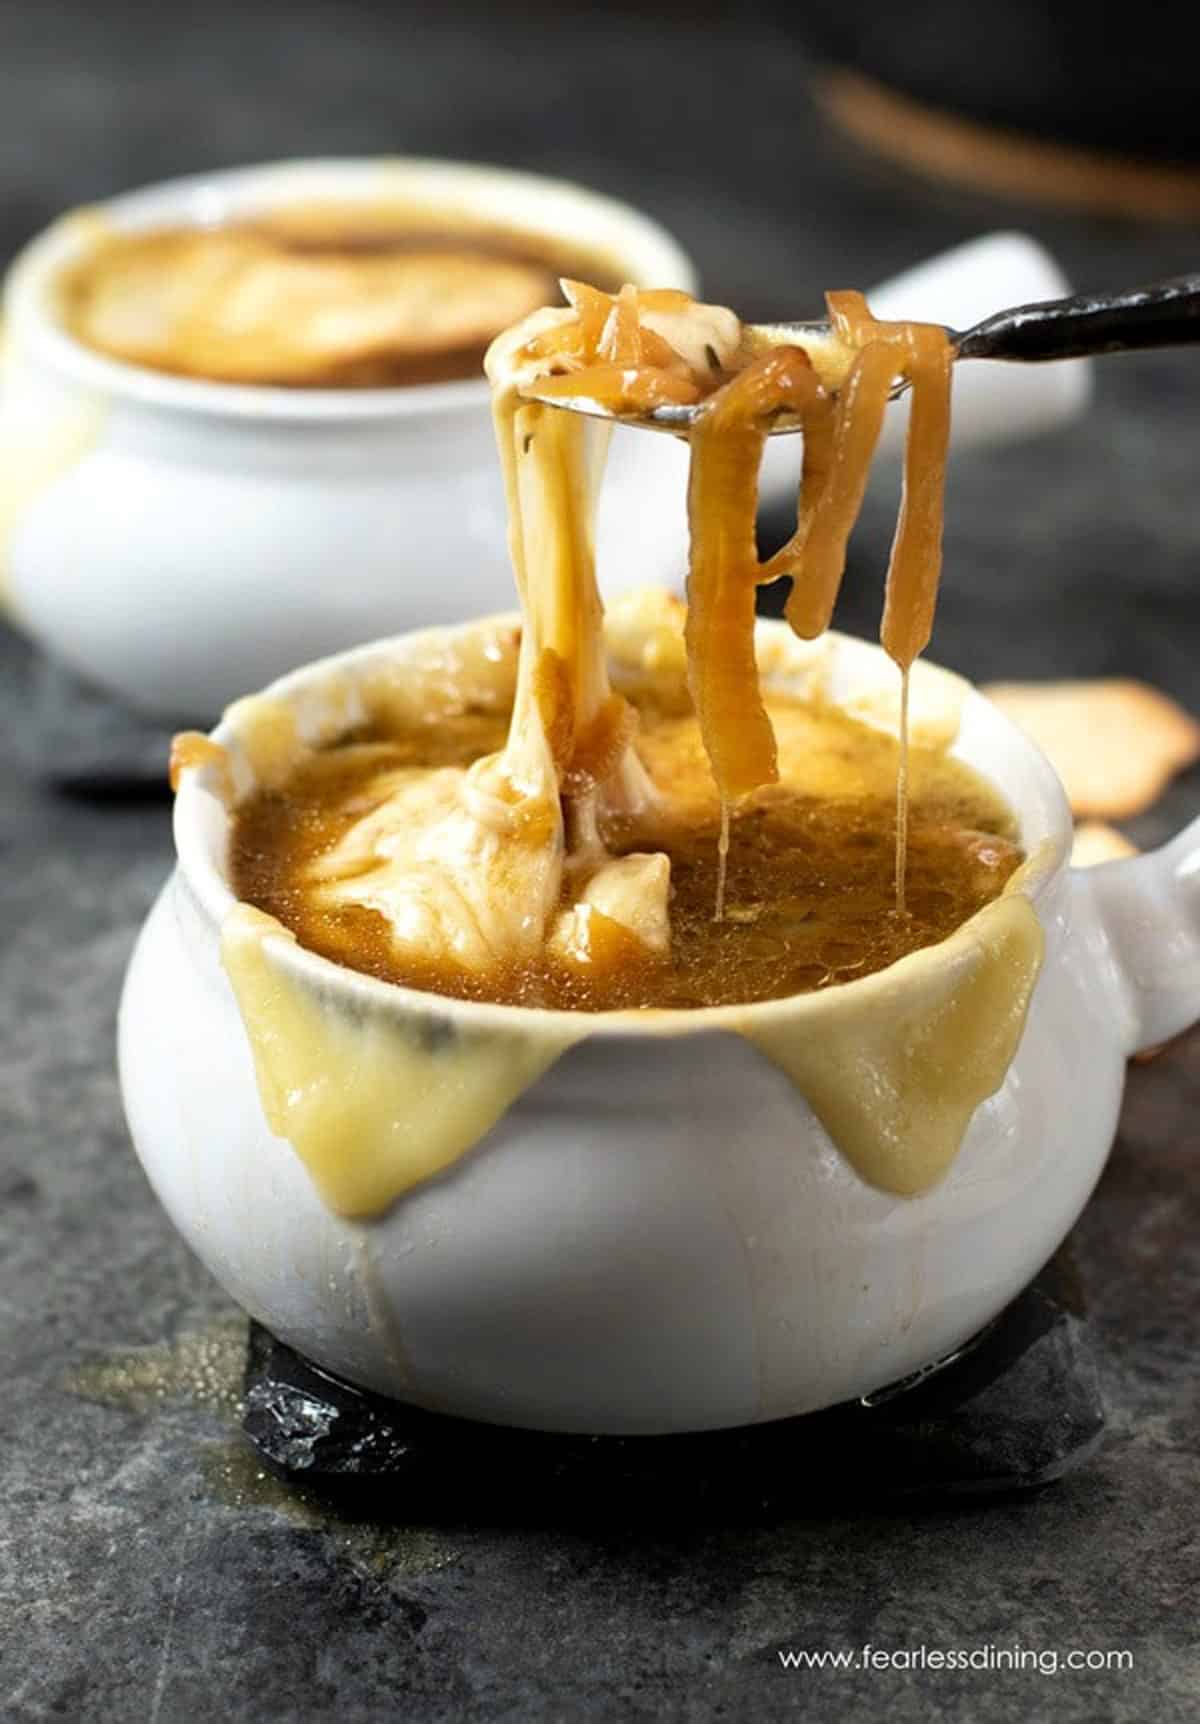 A spoon lifting up caramelized onions and cheese from a bowl of French onion soup.